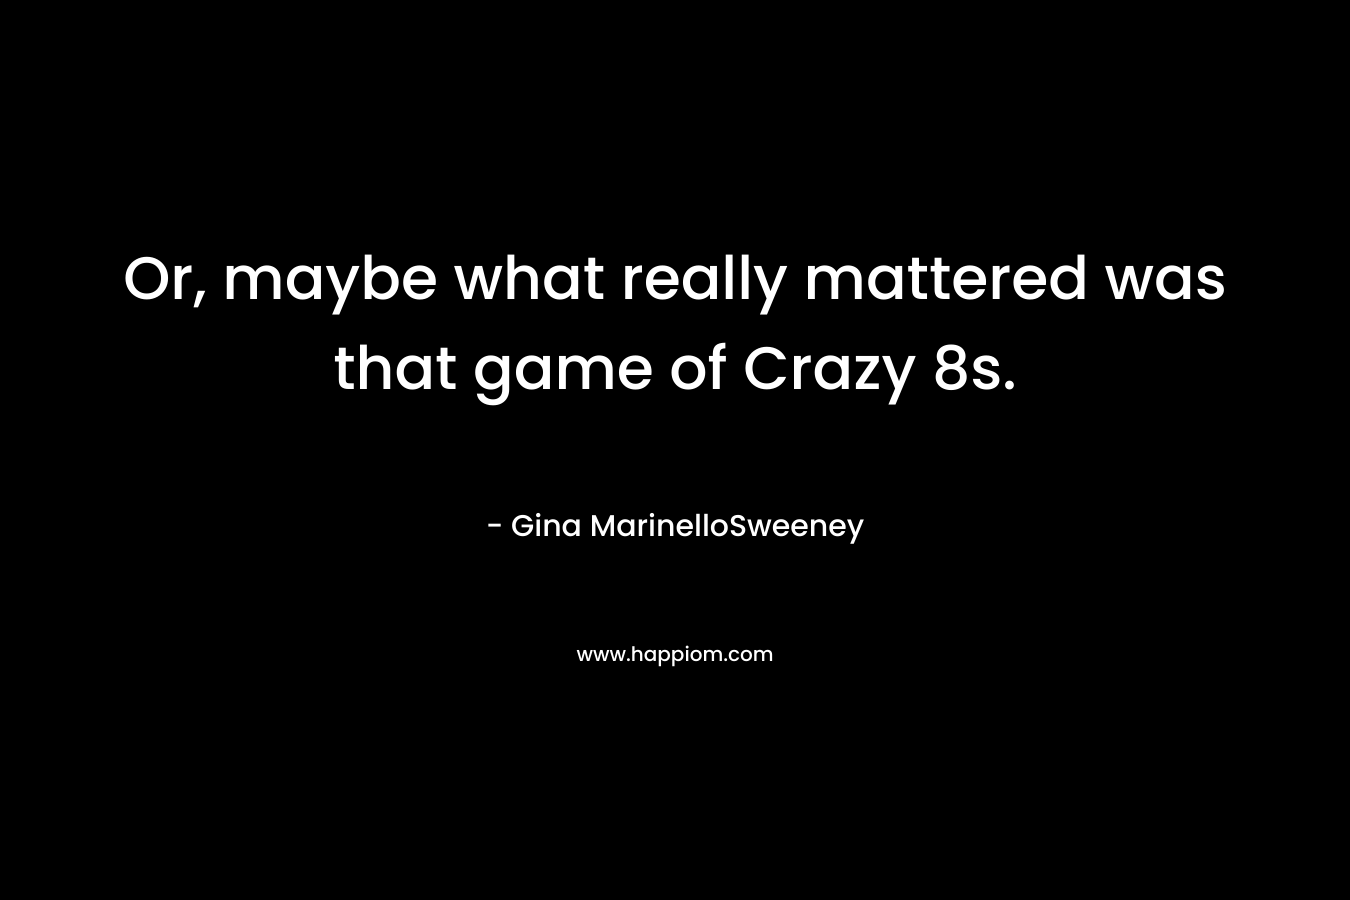 Or, maybe what really mattered was that game of Crazy 8s.